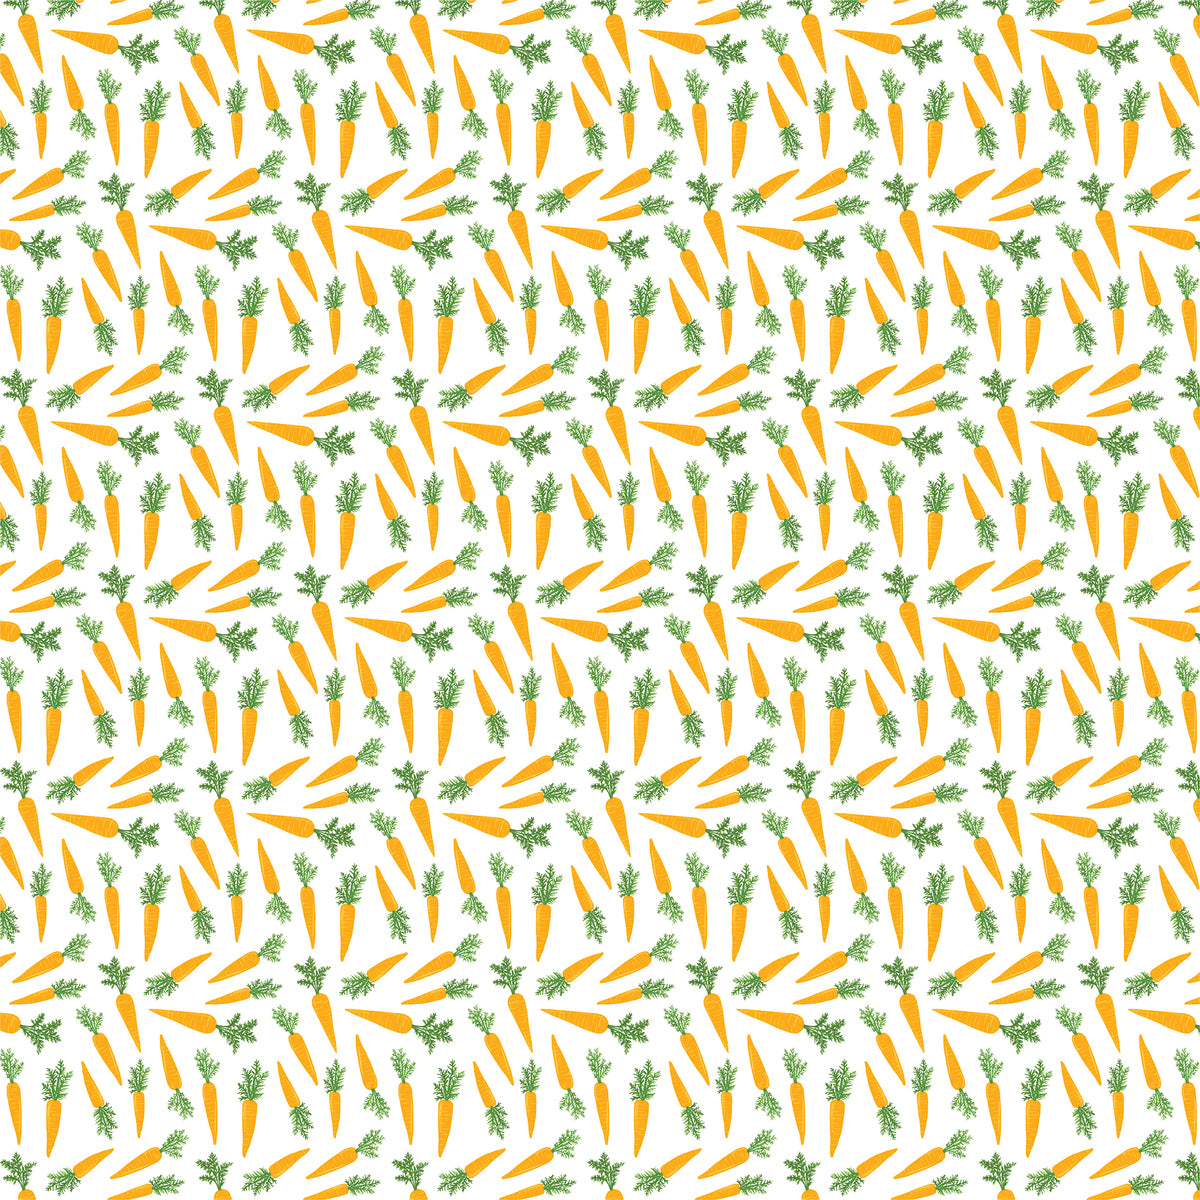 12x12 patterned paper with lots of cute, tiny carrots on white background